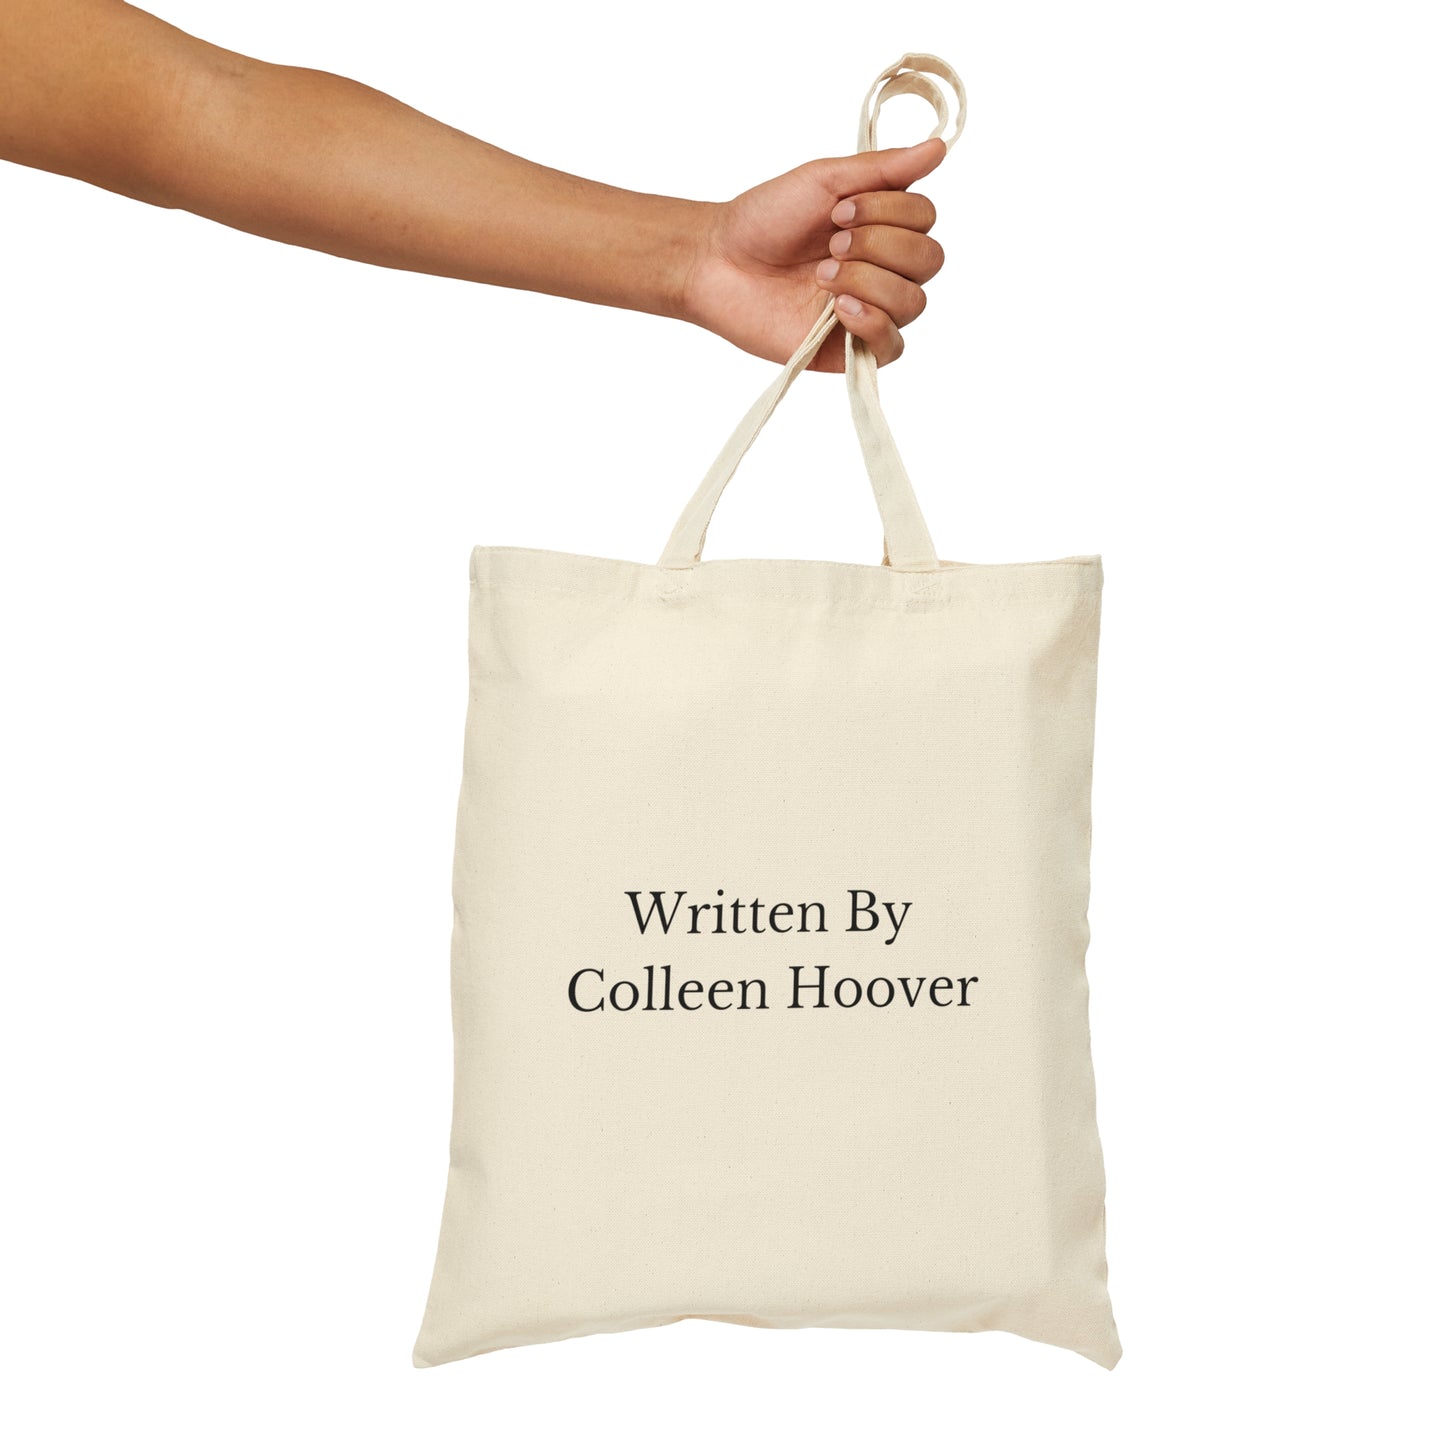 Written By Colleen Hoover Black Cotton Tote Bag